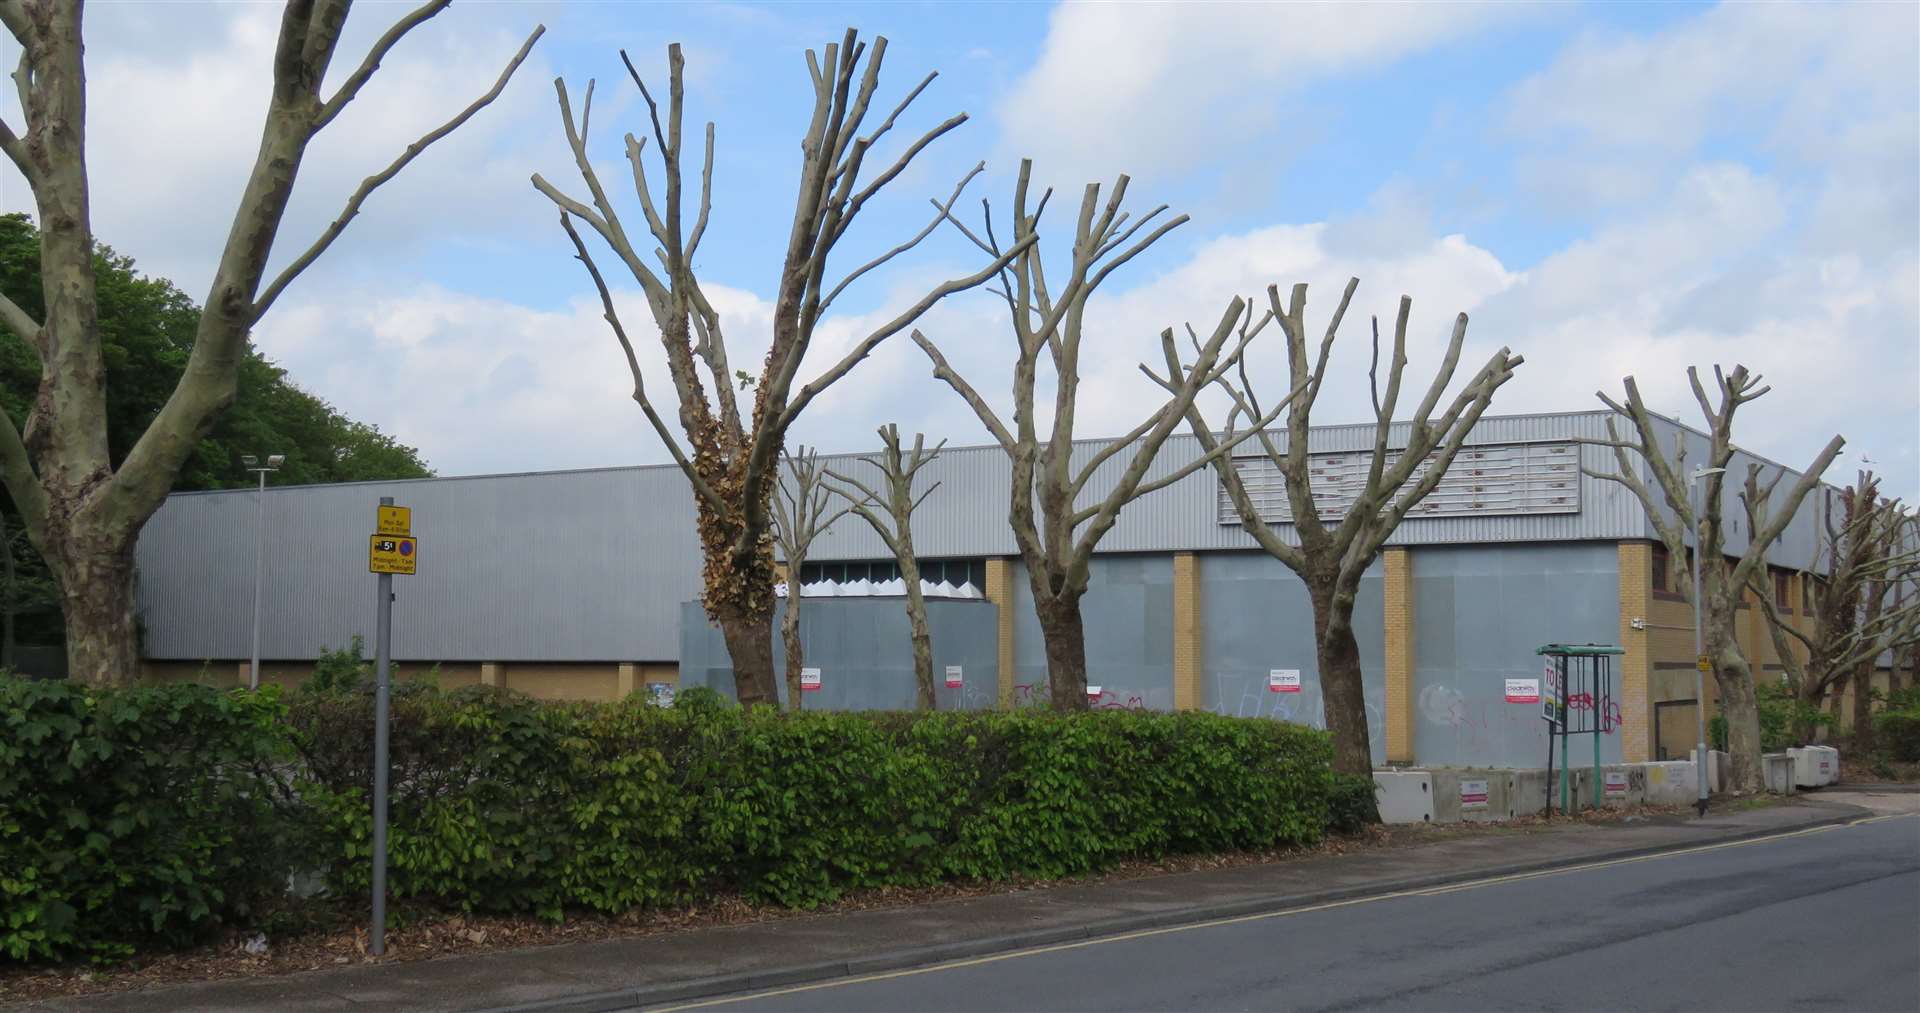 The trees have recently been drastically cut back by the council